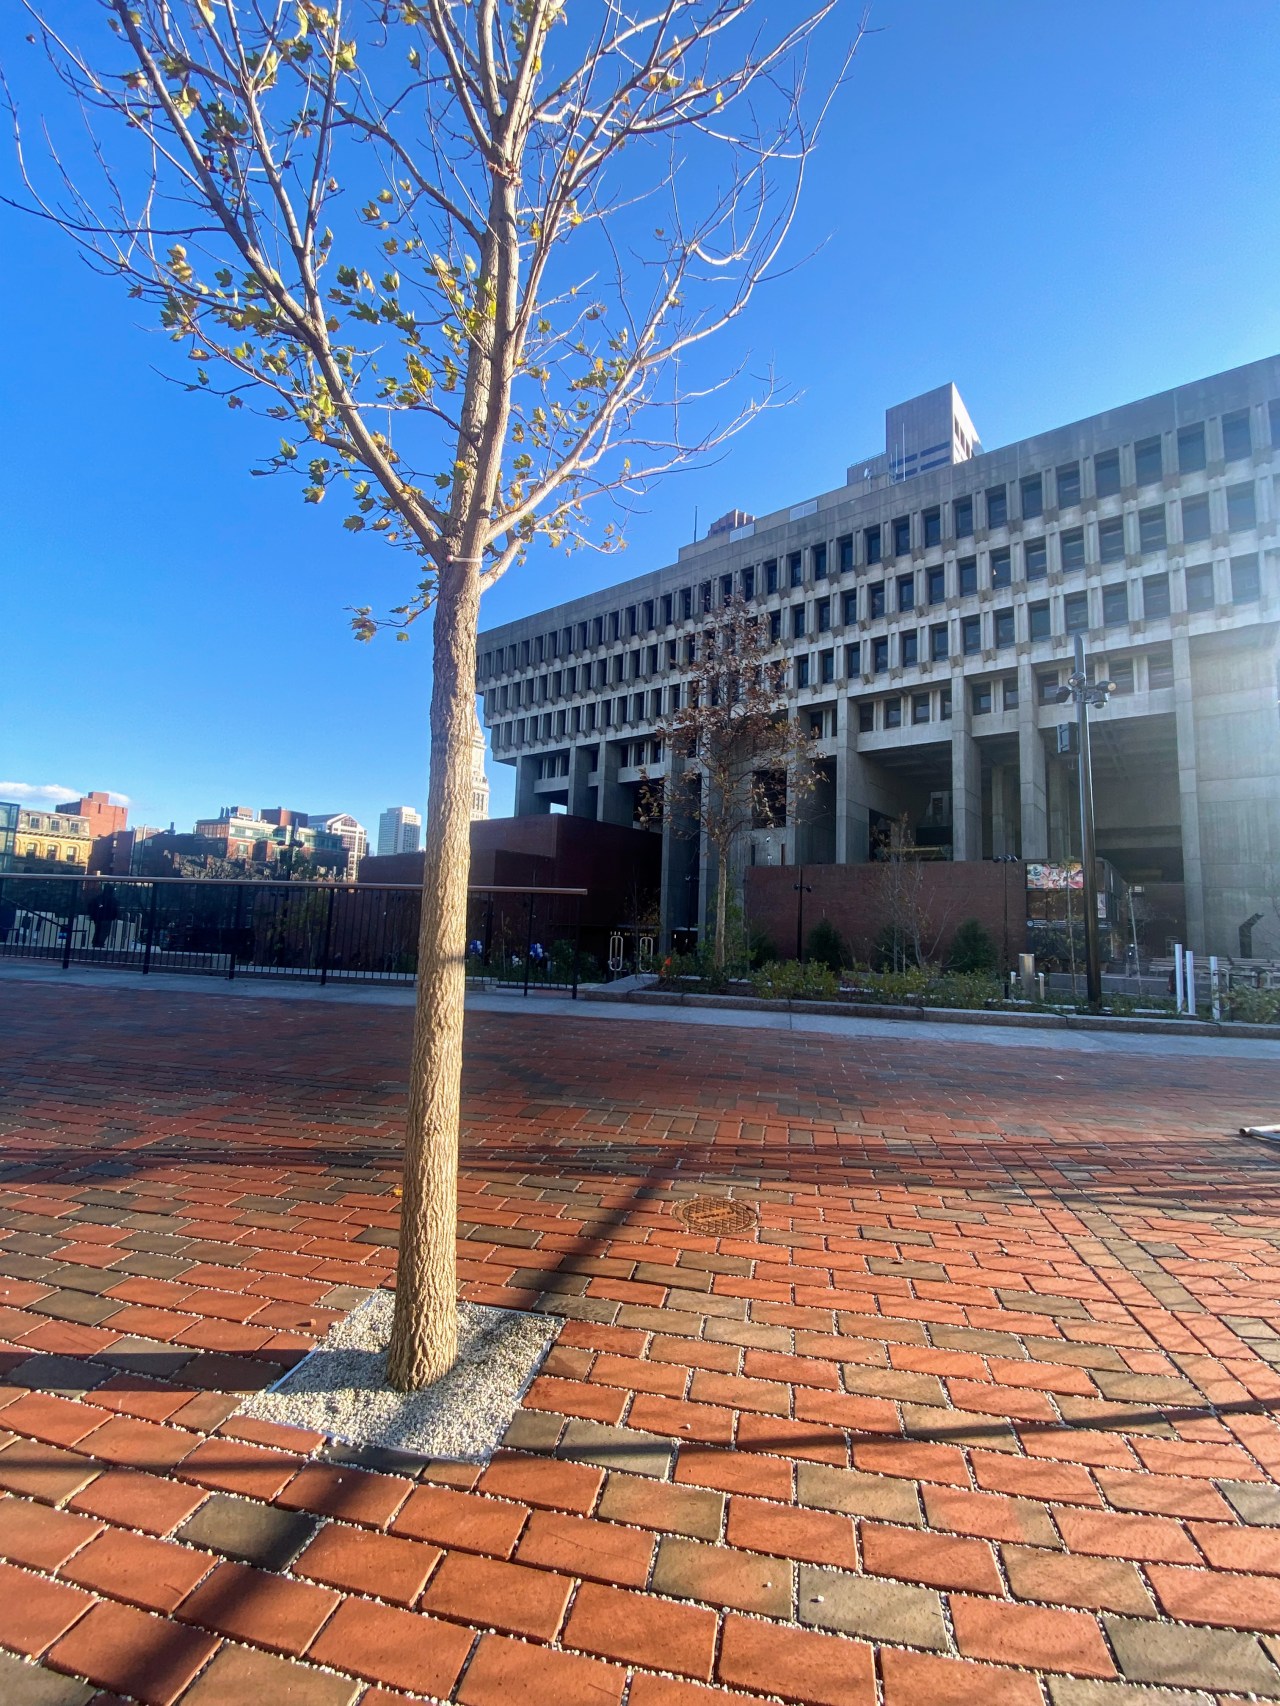 a young maple tree planted inside a small square filled with gravel amidst red bricks with City Hall in the background.